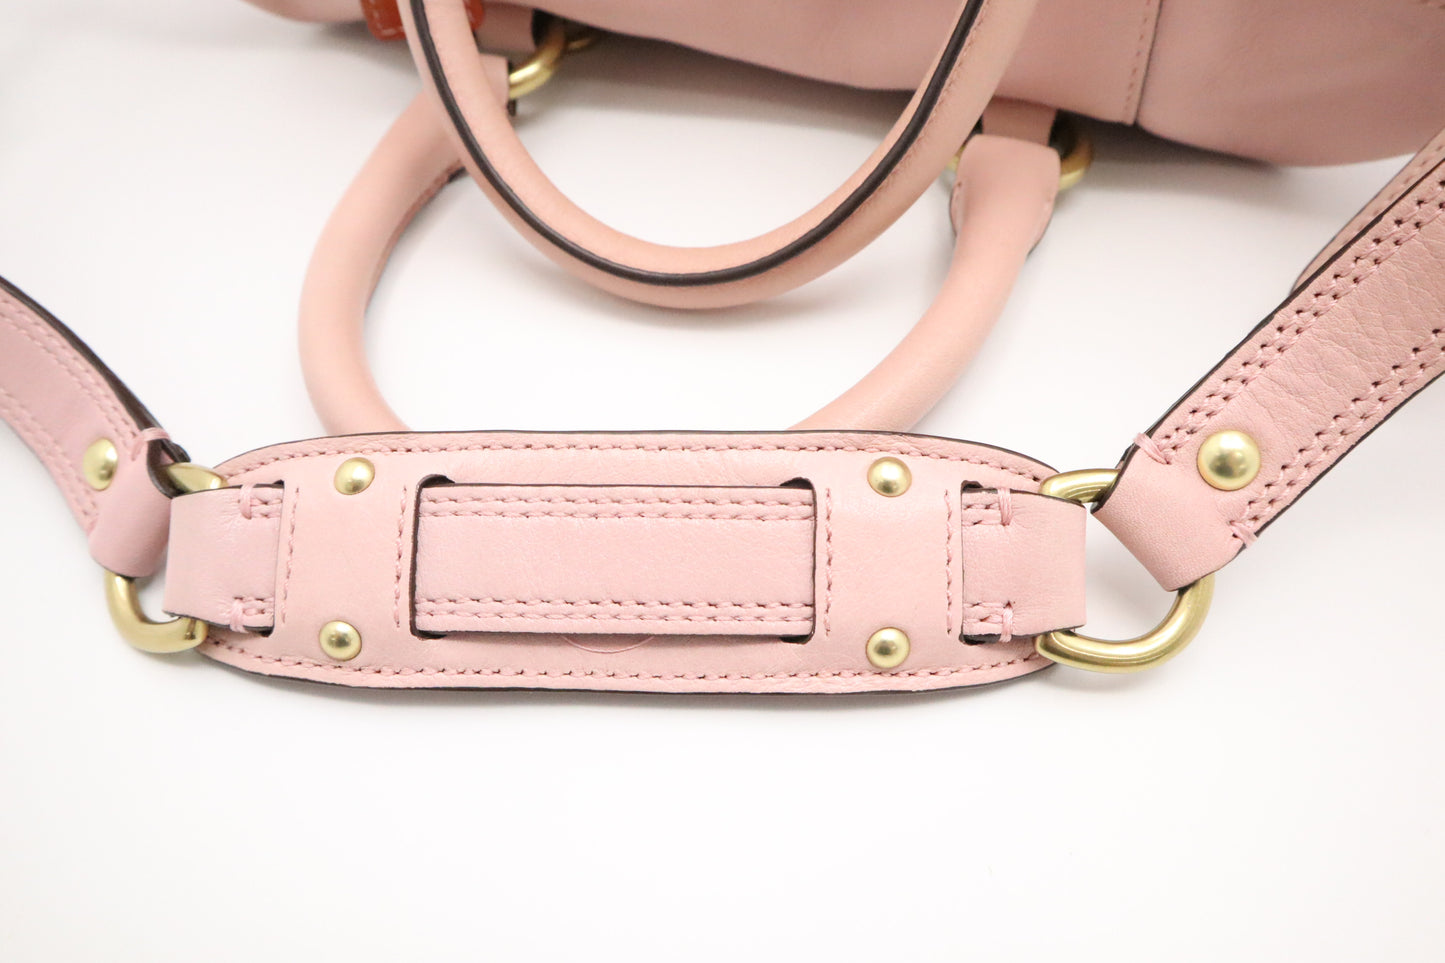 Coach Handbag in Pink Leather